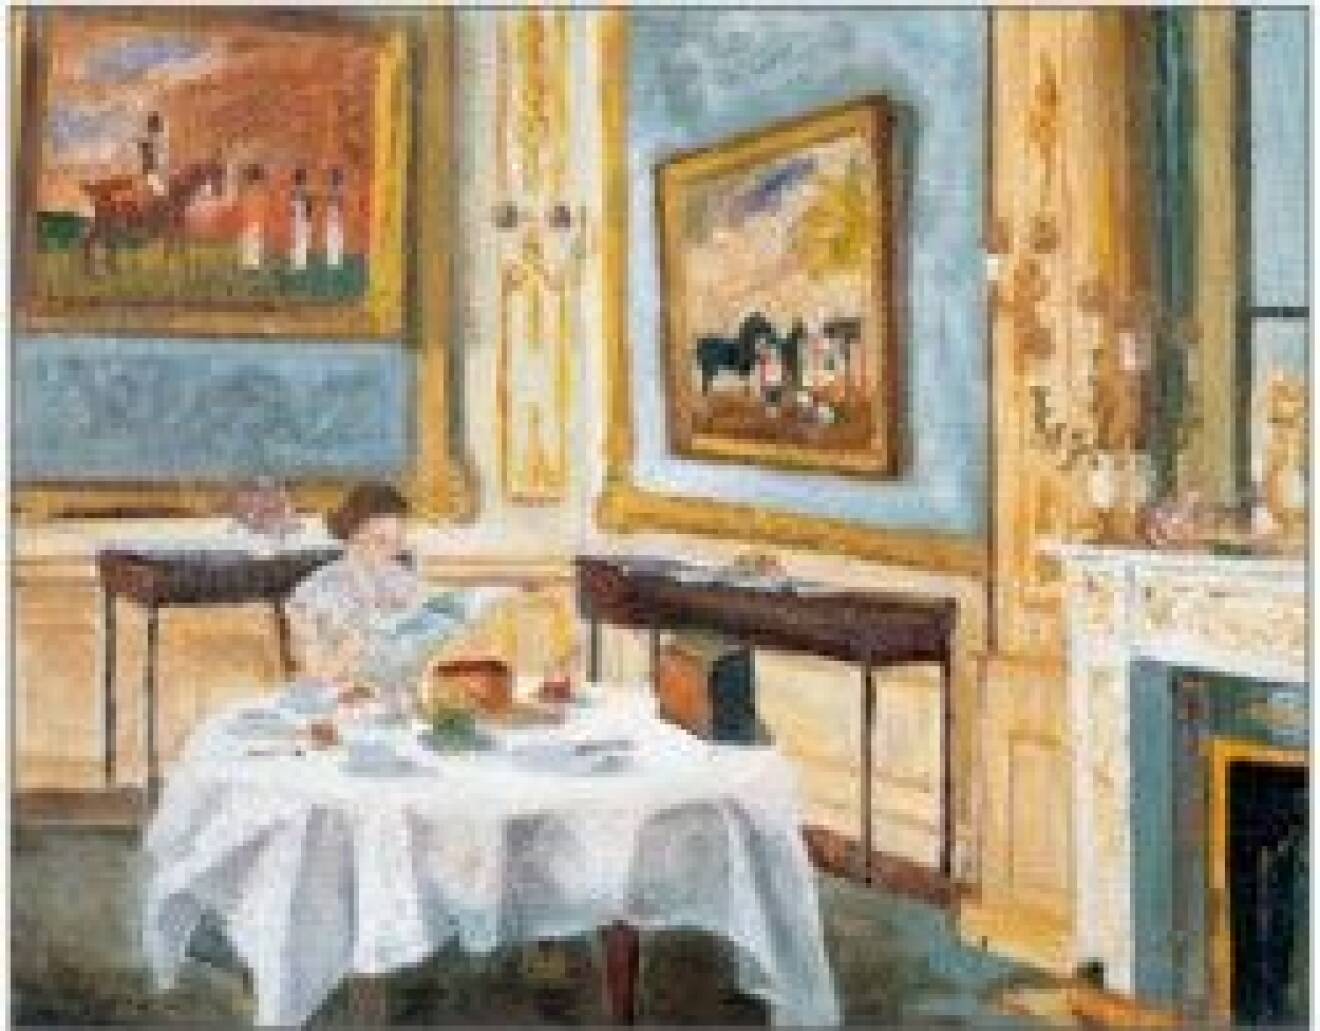 ”The Queen at breakfast” målades 1965.